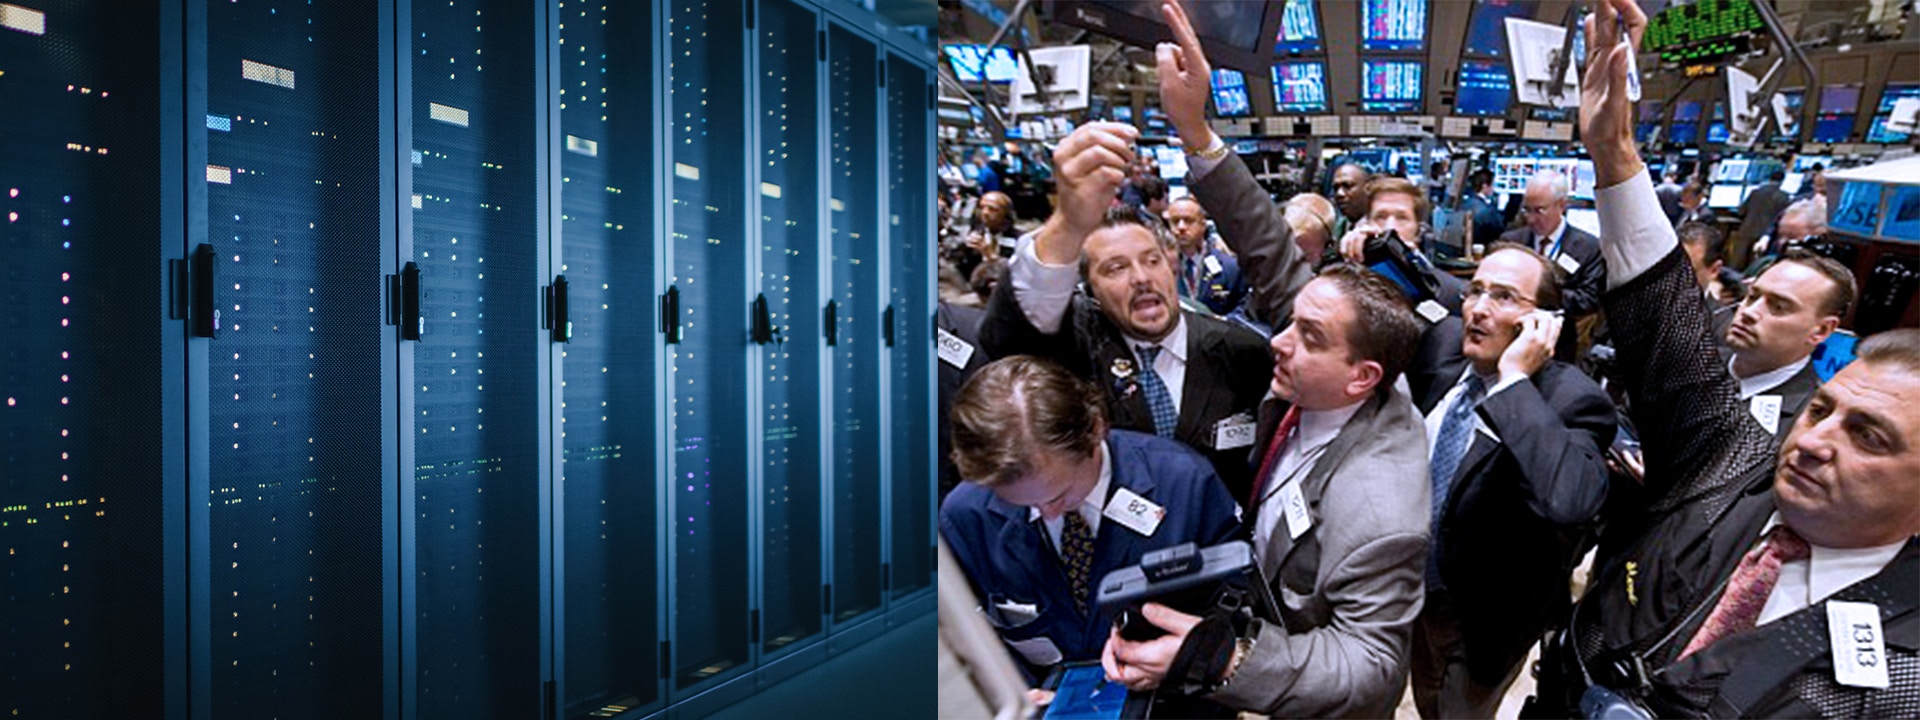 Data center and NYSE traders